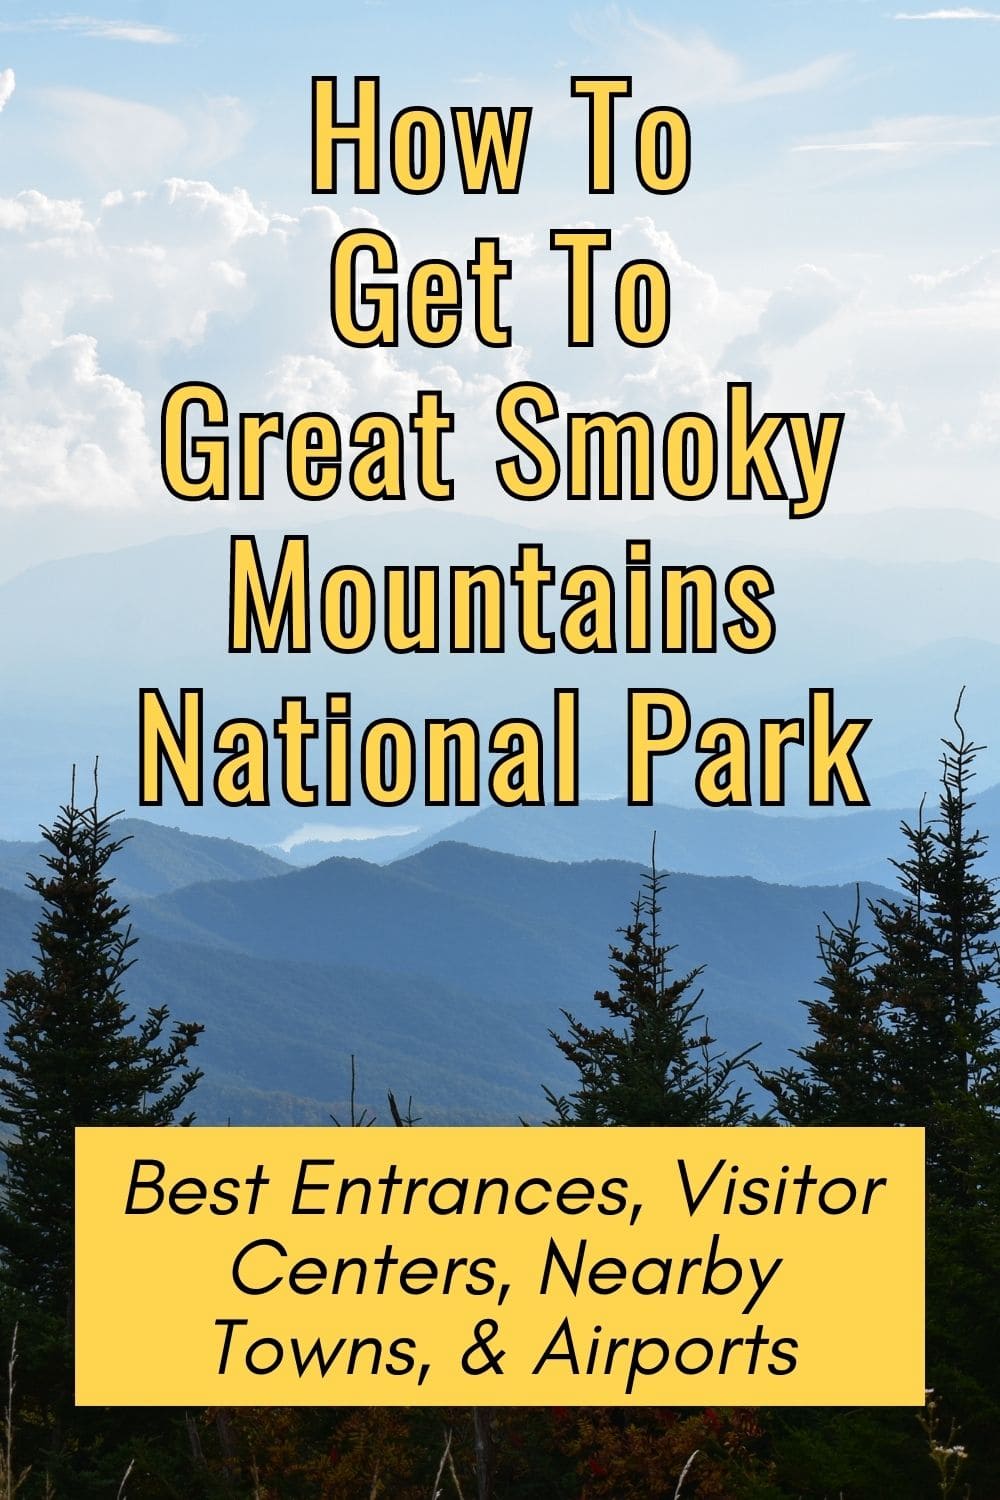 How to Get to Great Smoky Mountains National Park